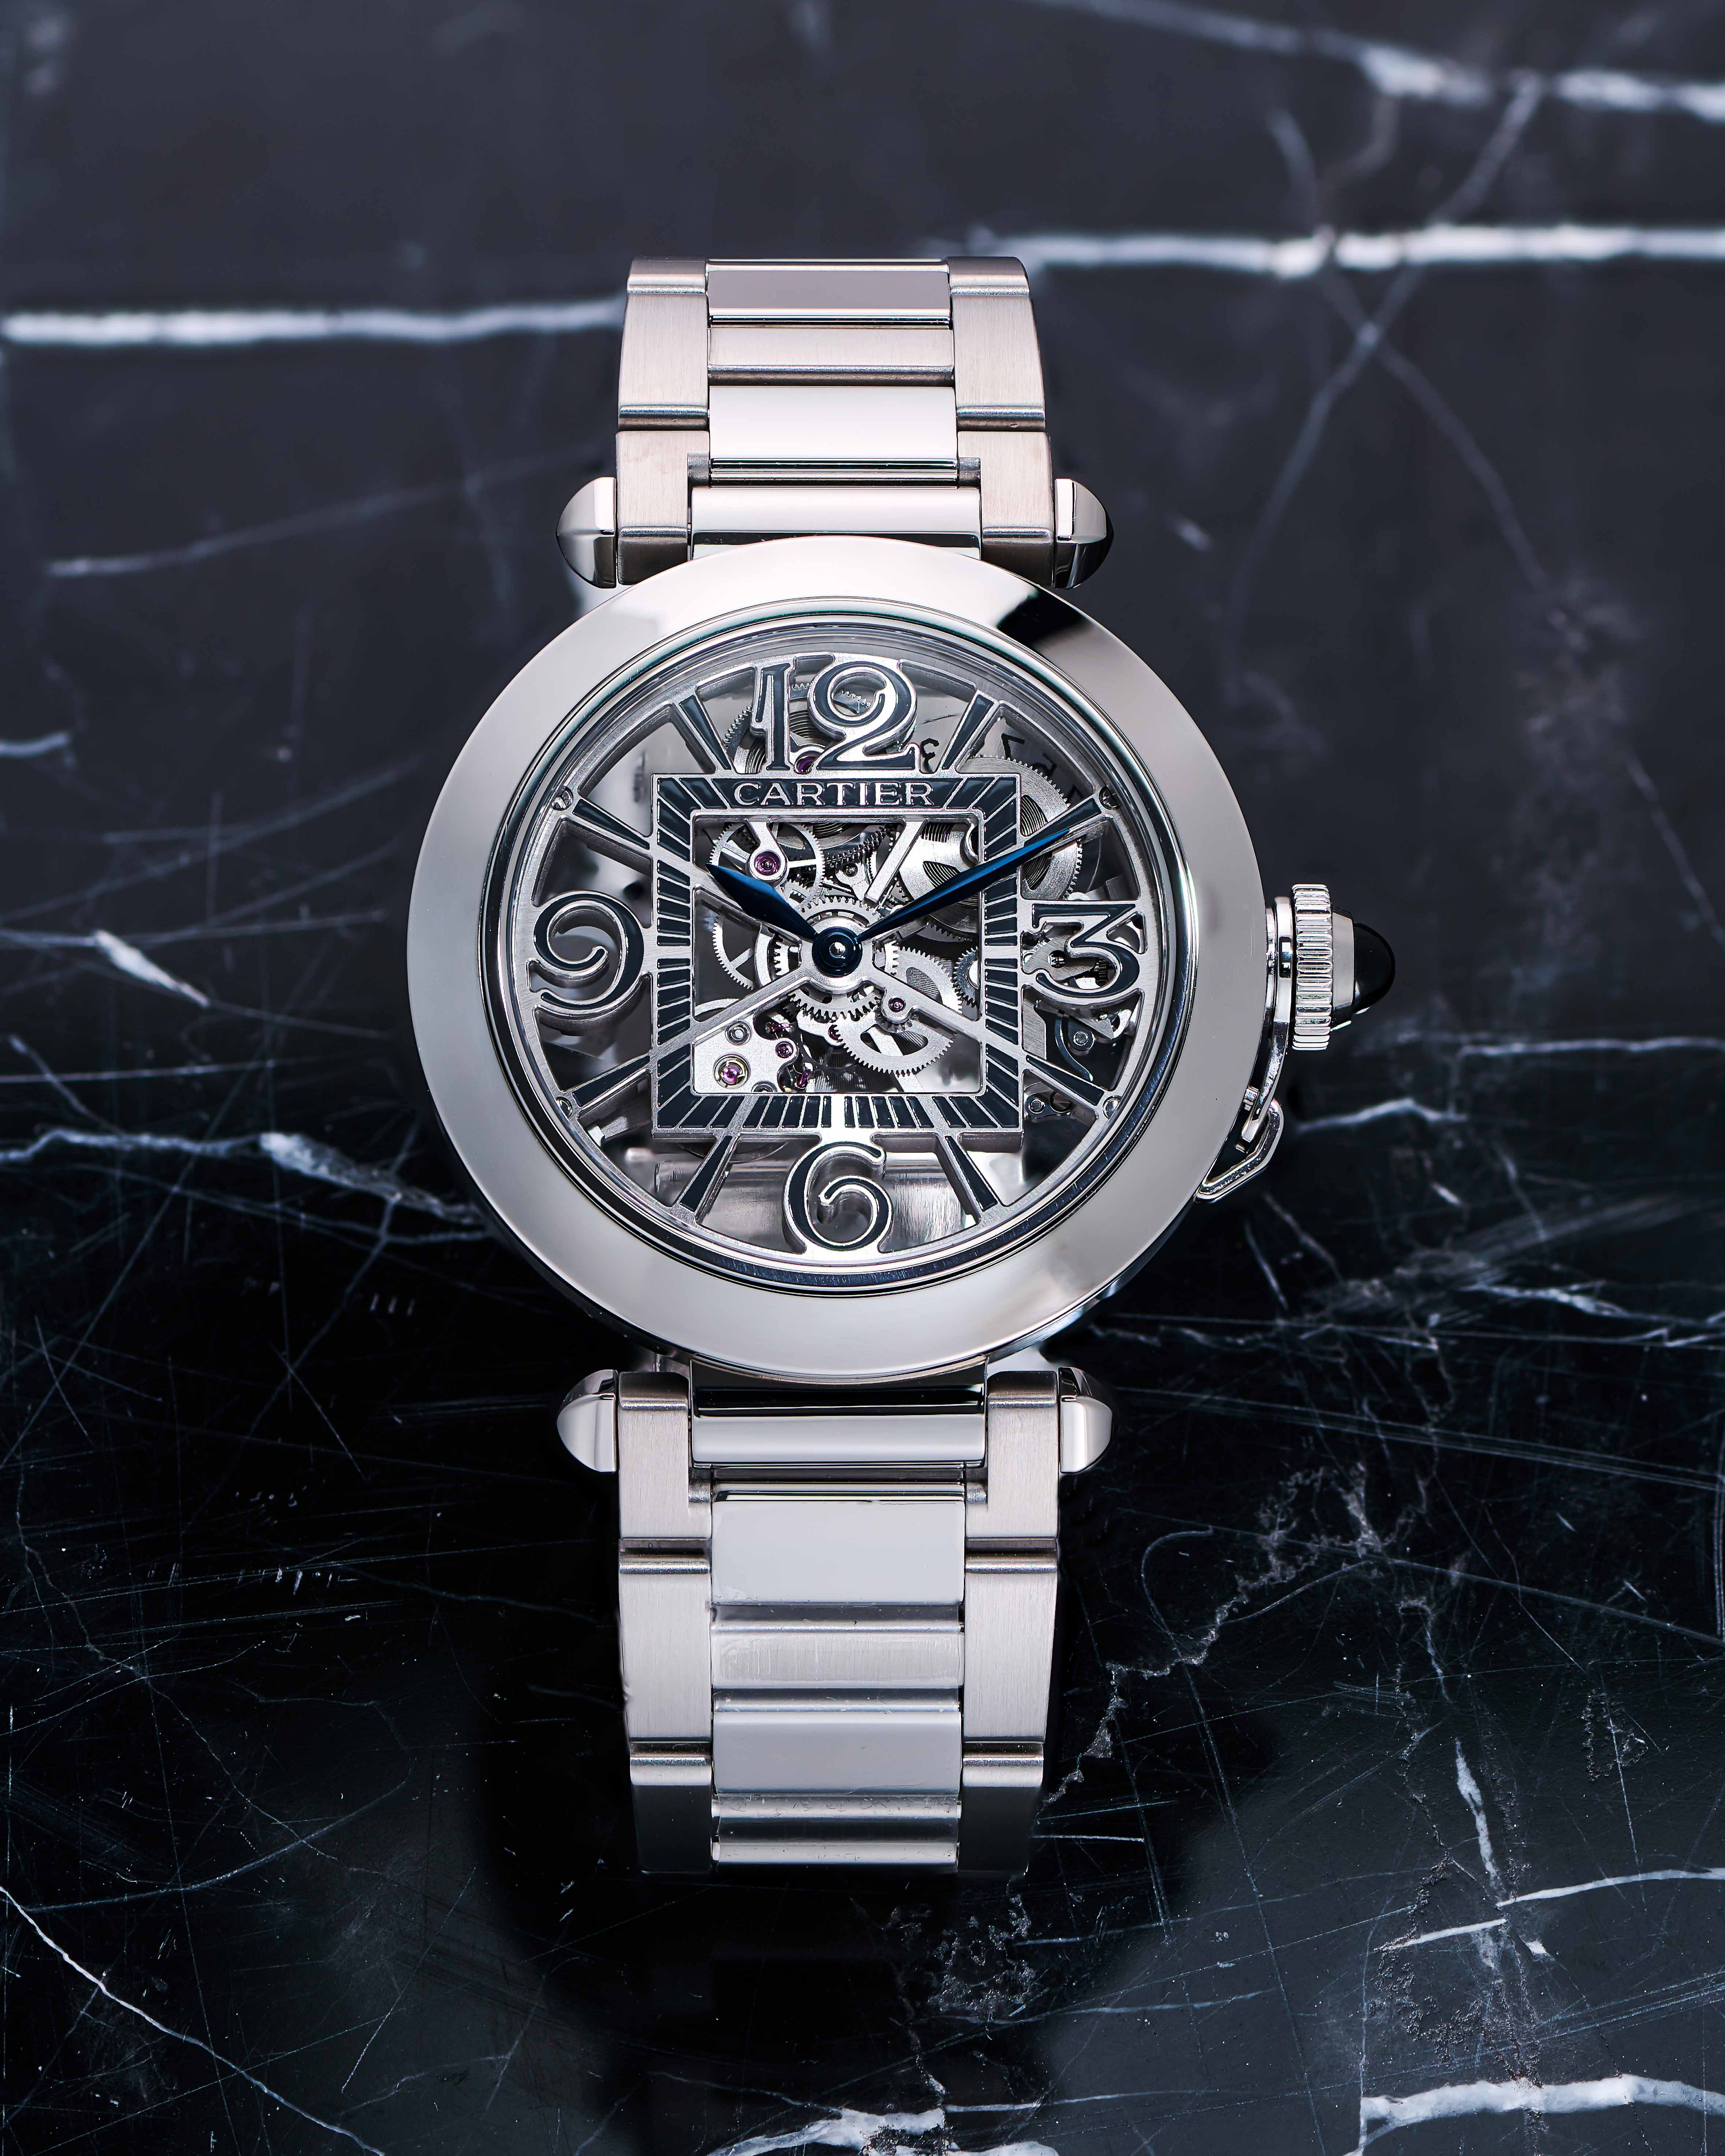 Stainless Steel Timepiece with Skeleton Dial on a Black Marble Tabletop.